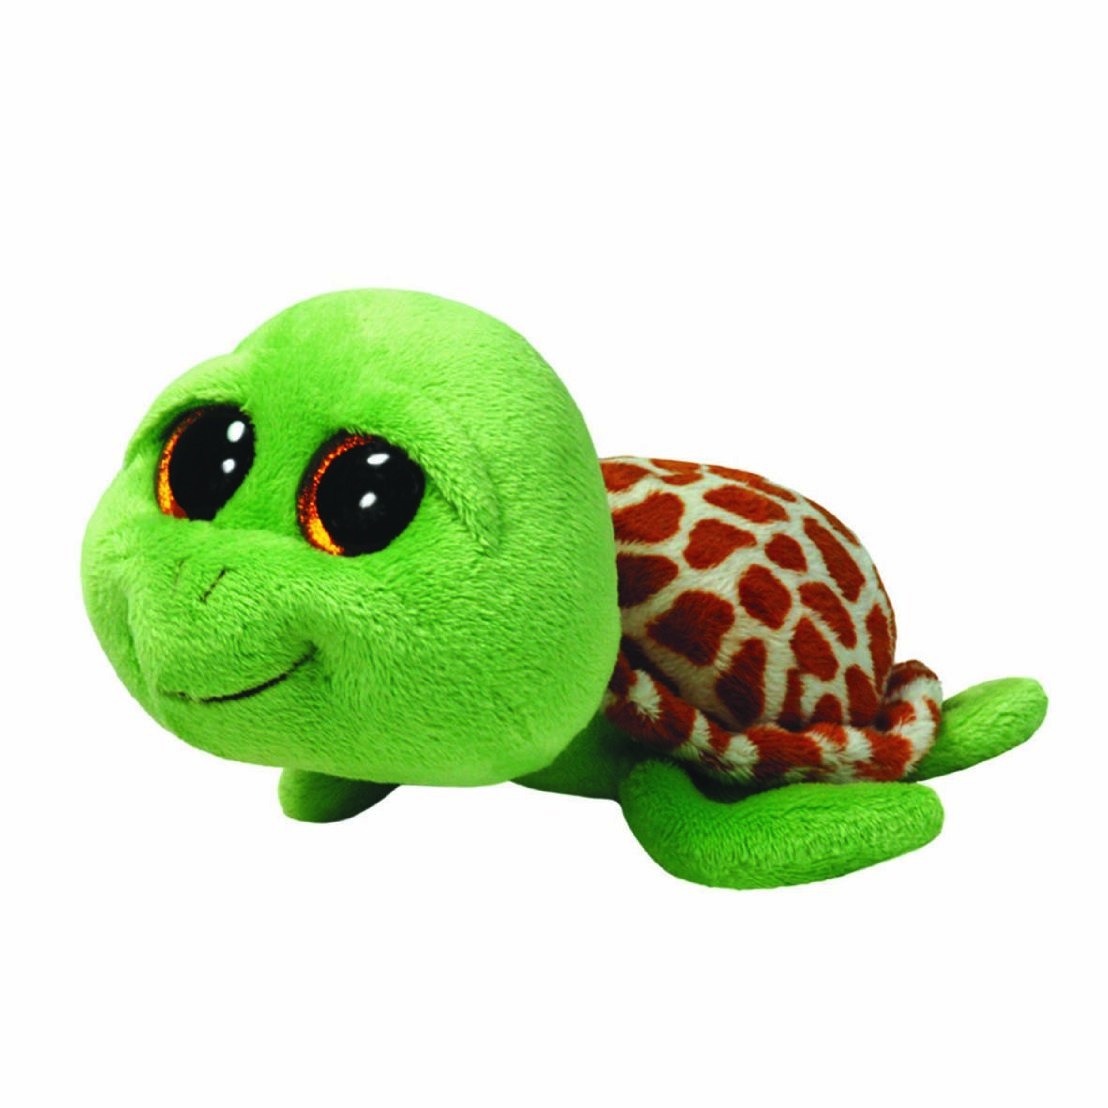 Kb04a Ty Beanie Boos Zippy Green Turtle Plush for sale online 